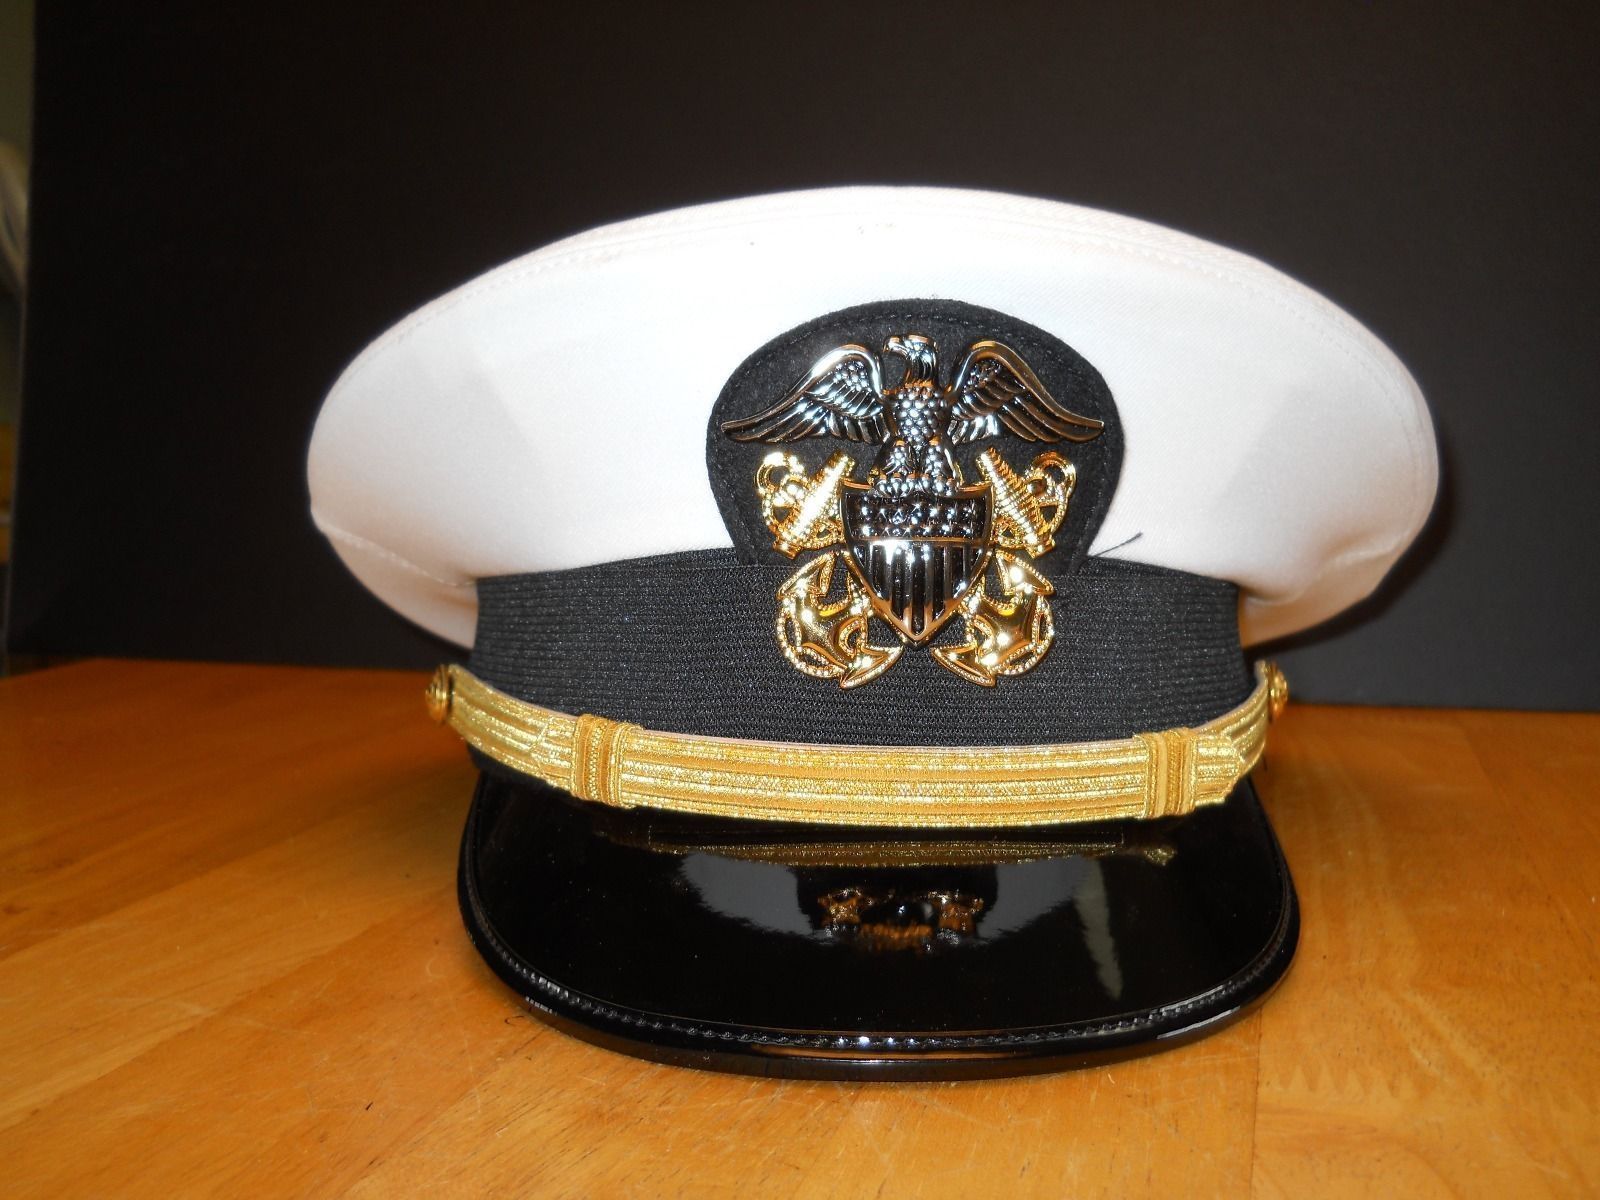 US NAVY LINE OFFICER WHITE CURRENT UNIFORM VISOR HAT AUTHENTIC NEW ALL SIZES - $79.00